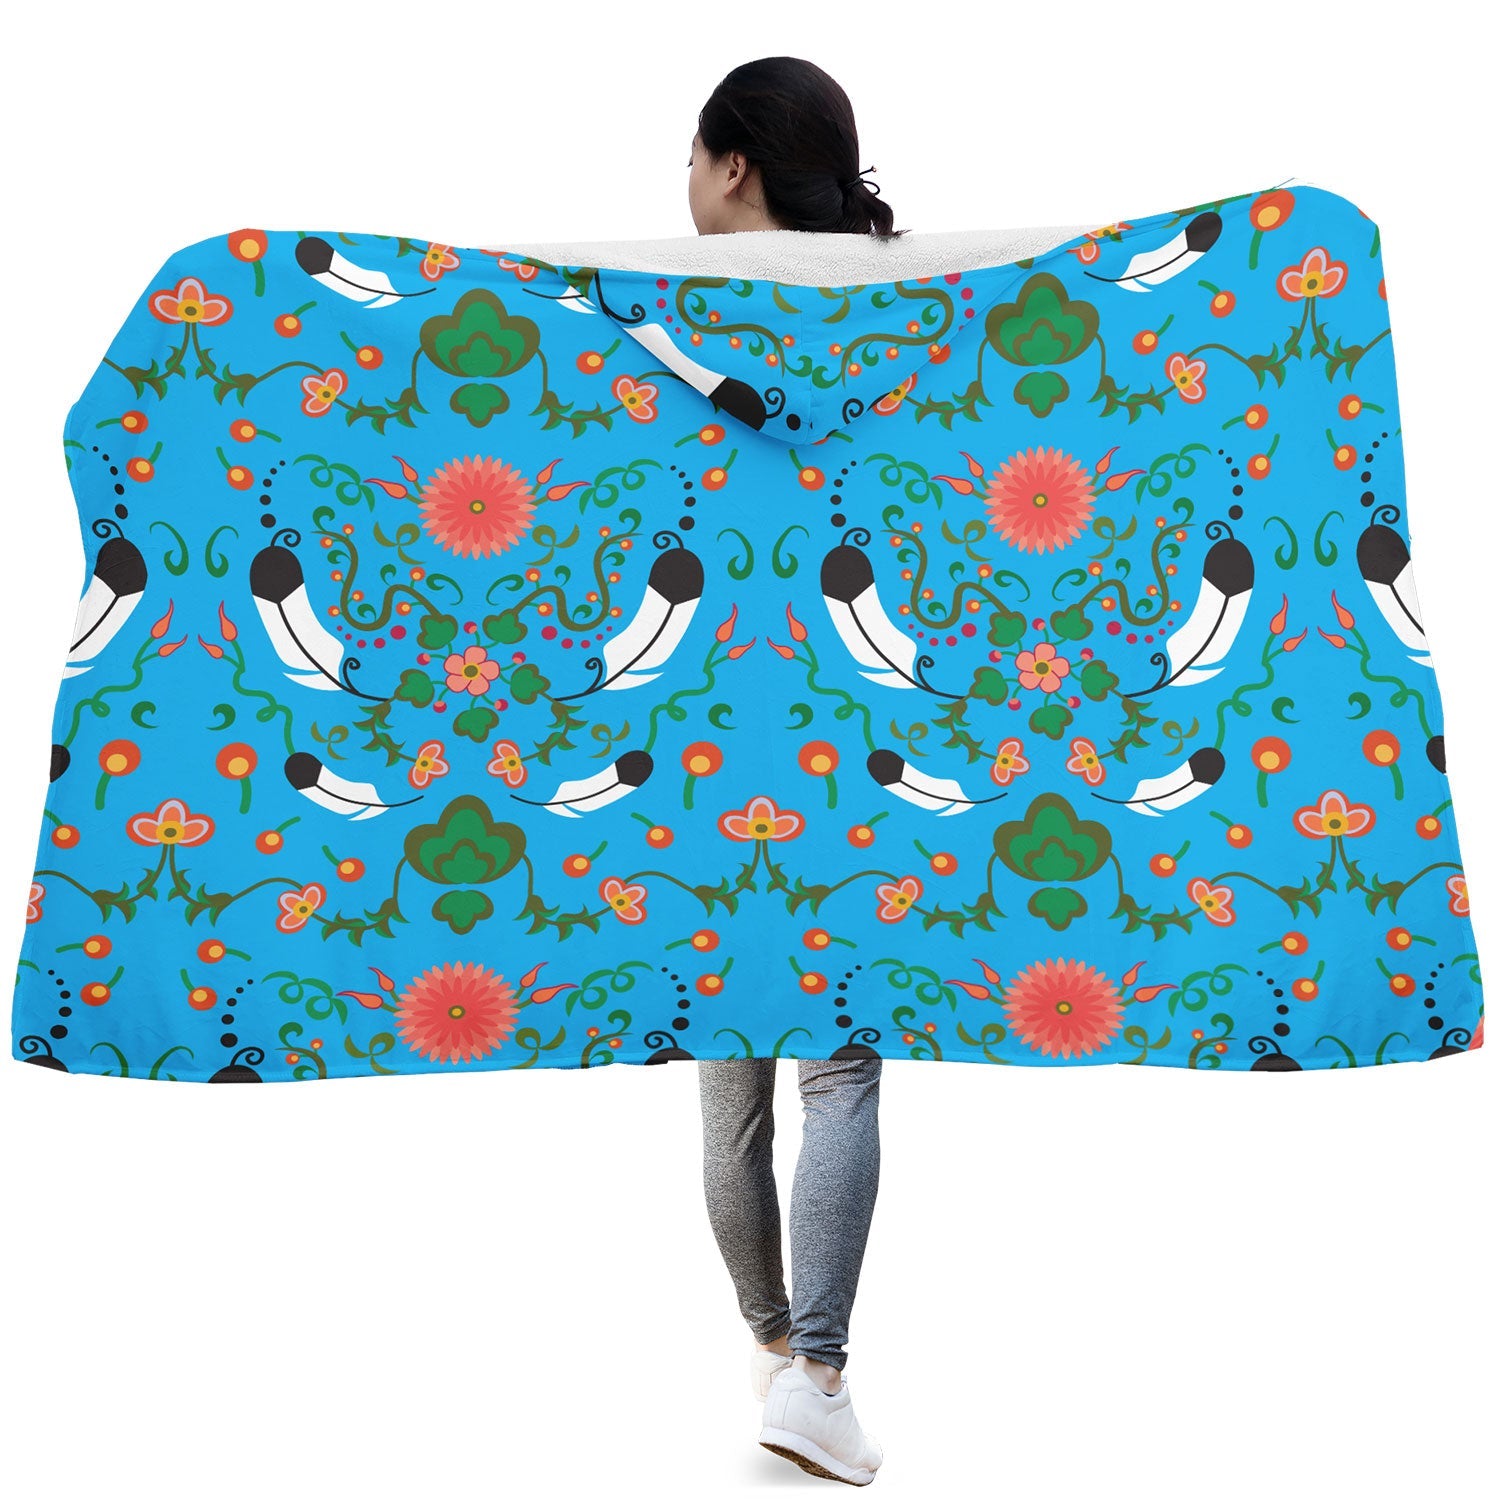 New Growth Bright Sky Hooded Blanket